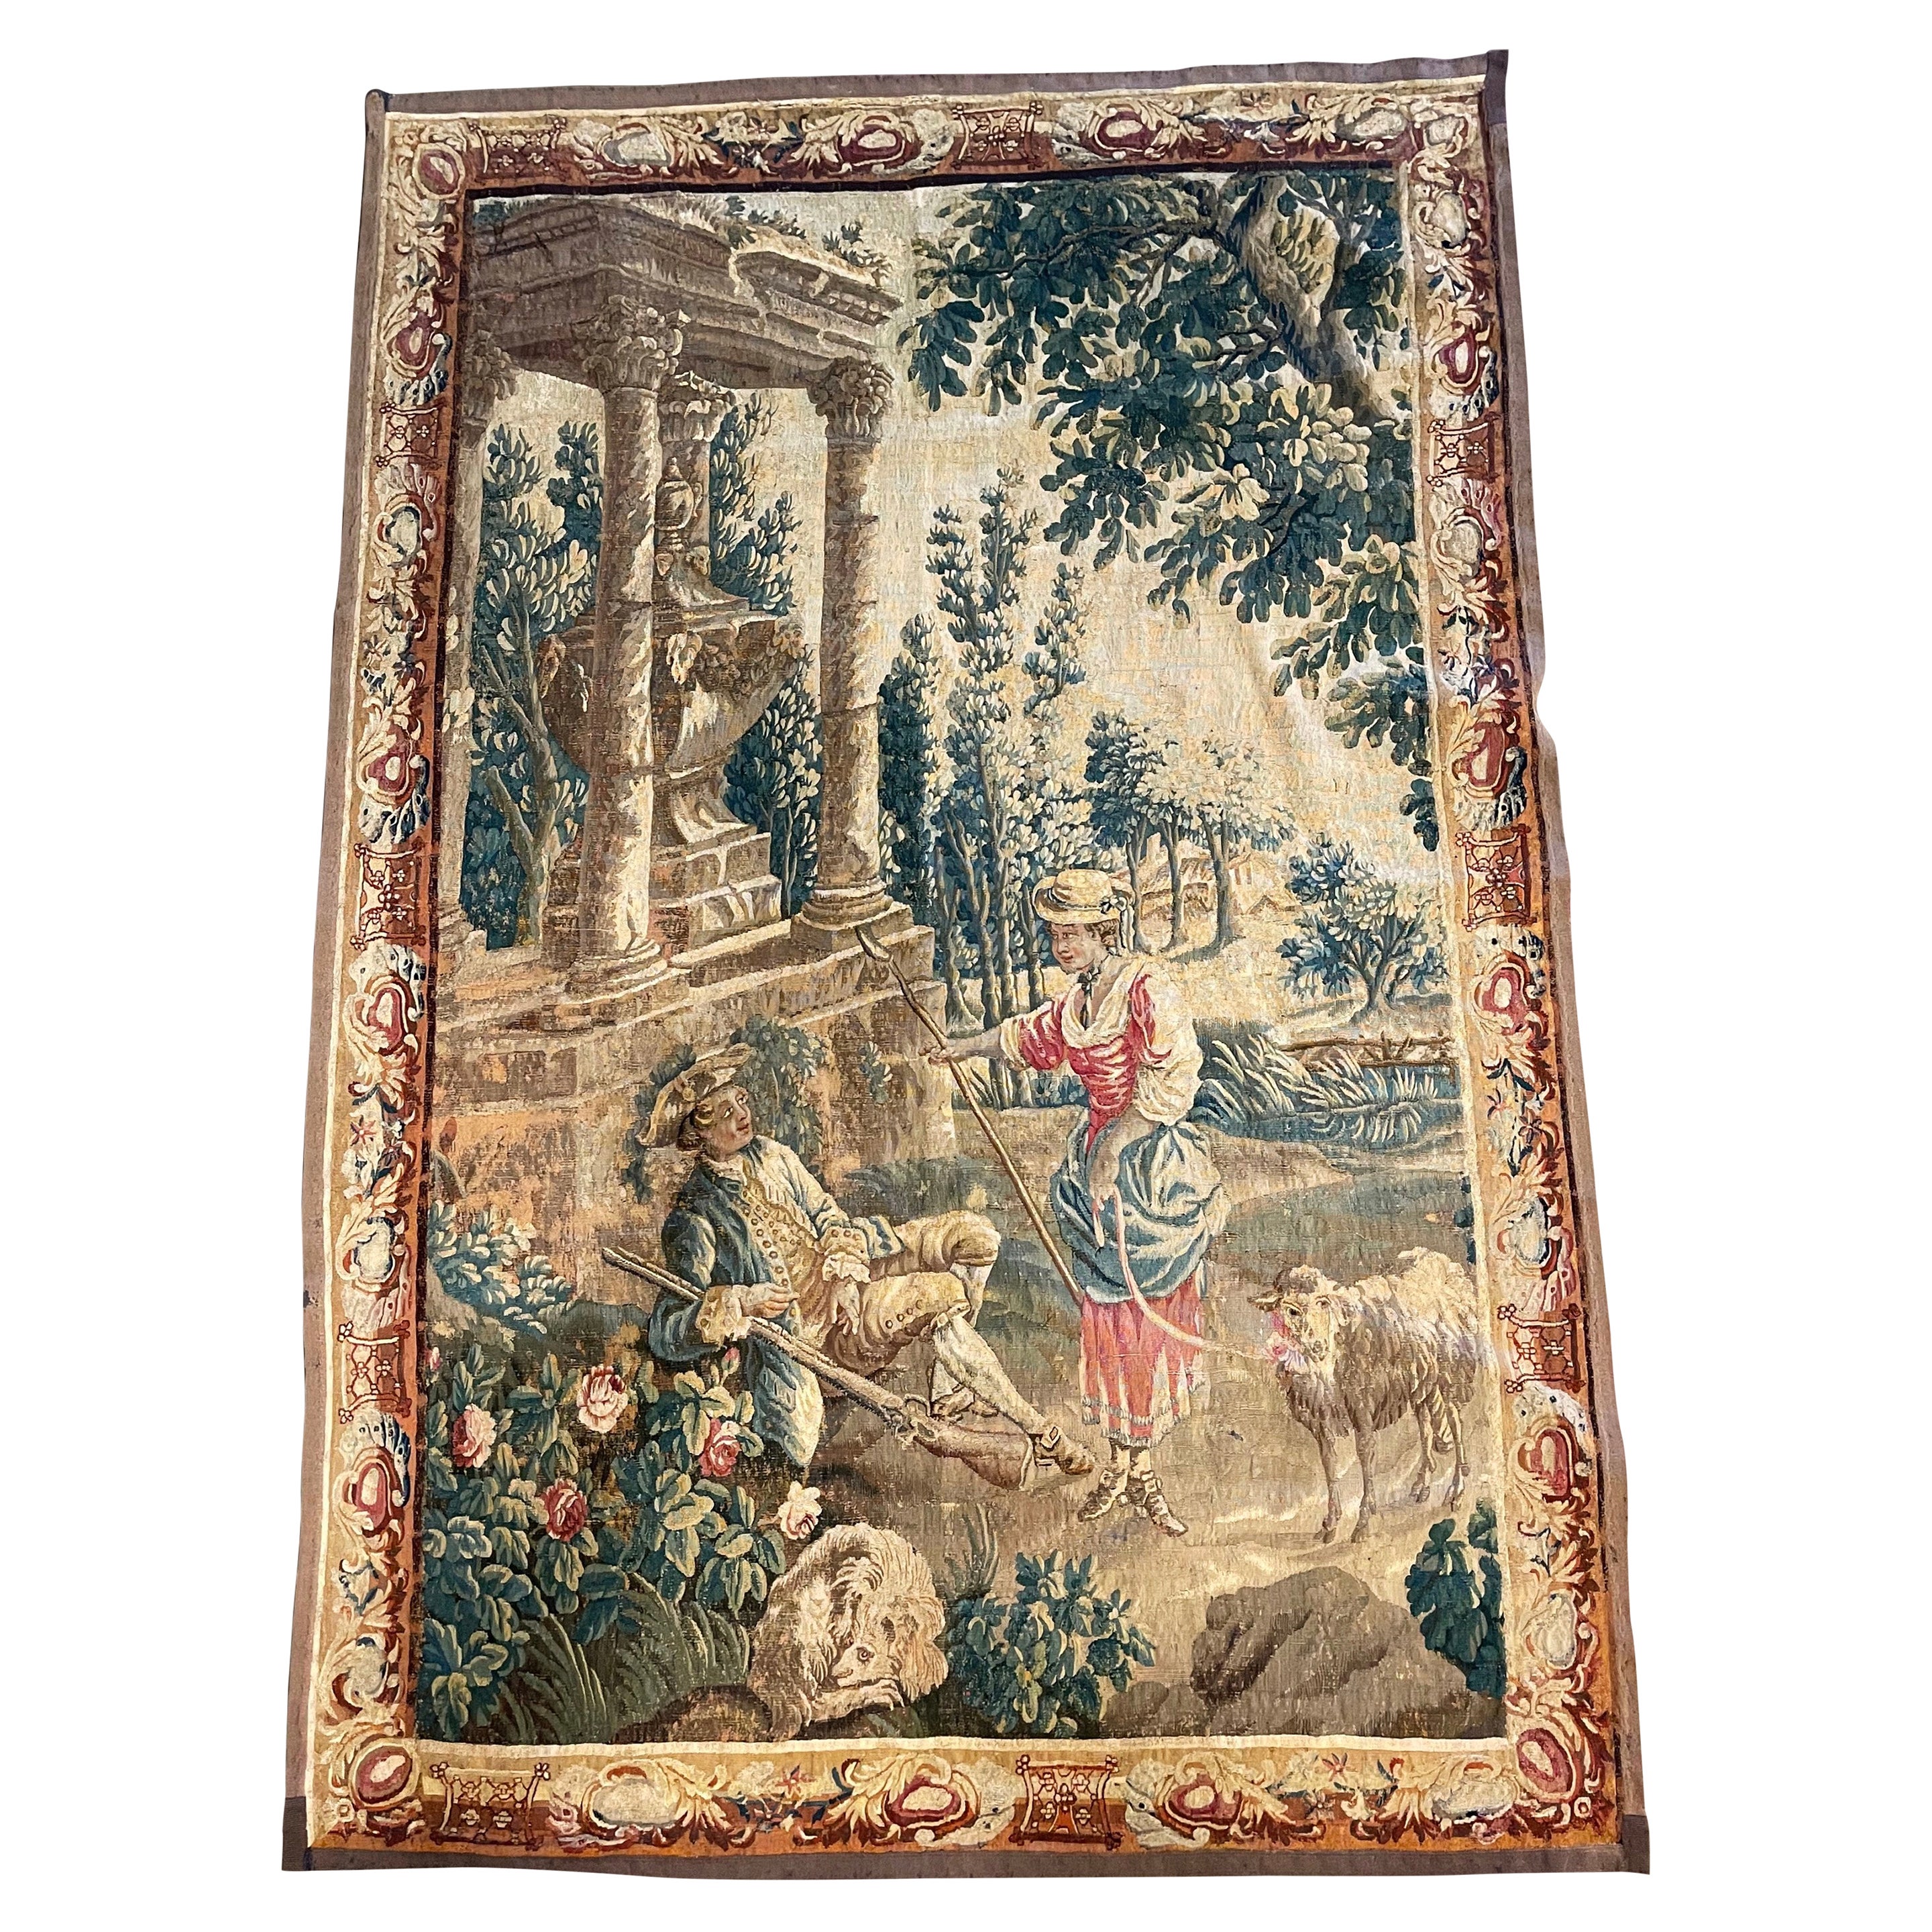 18th Century French Aubusson Tapestry "La Bergere" After J. B. Oudry